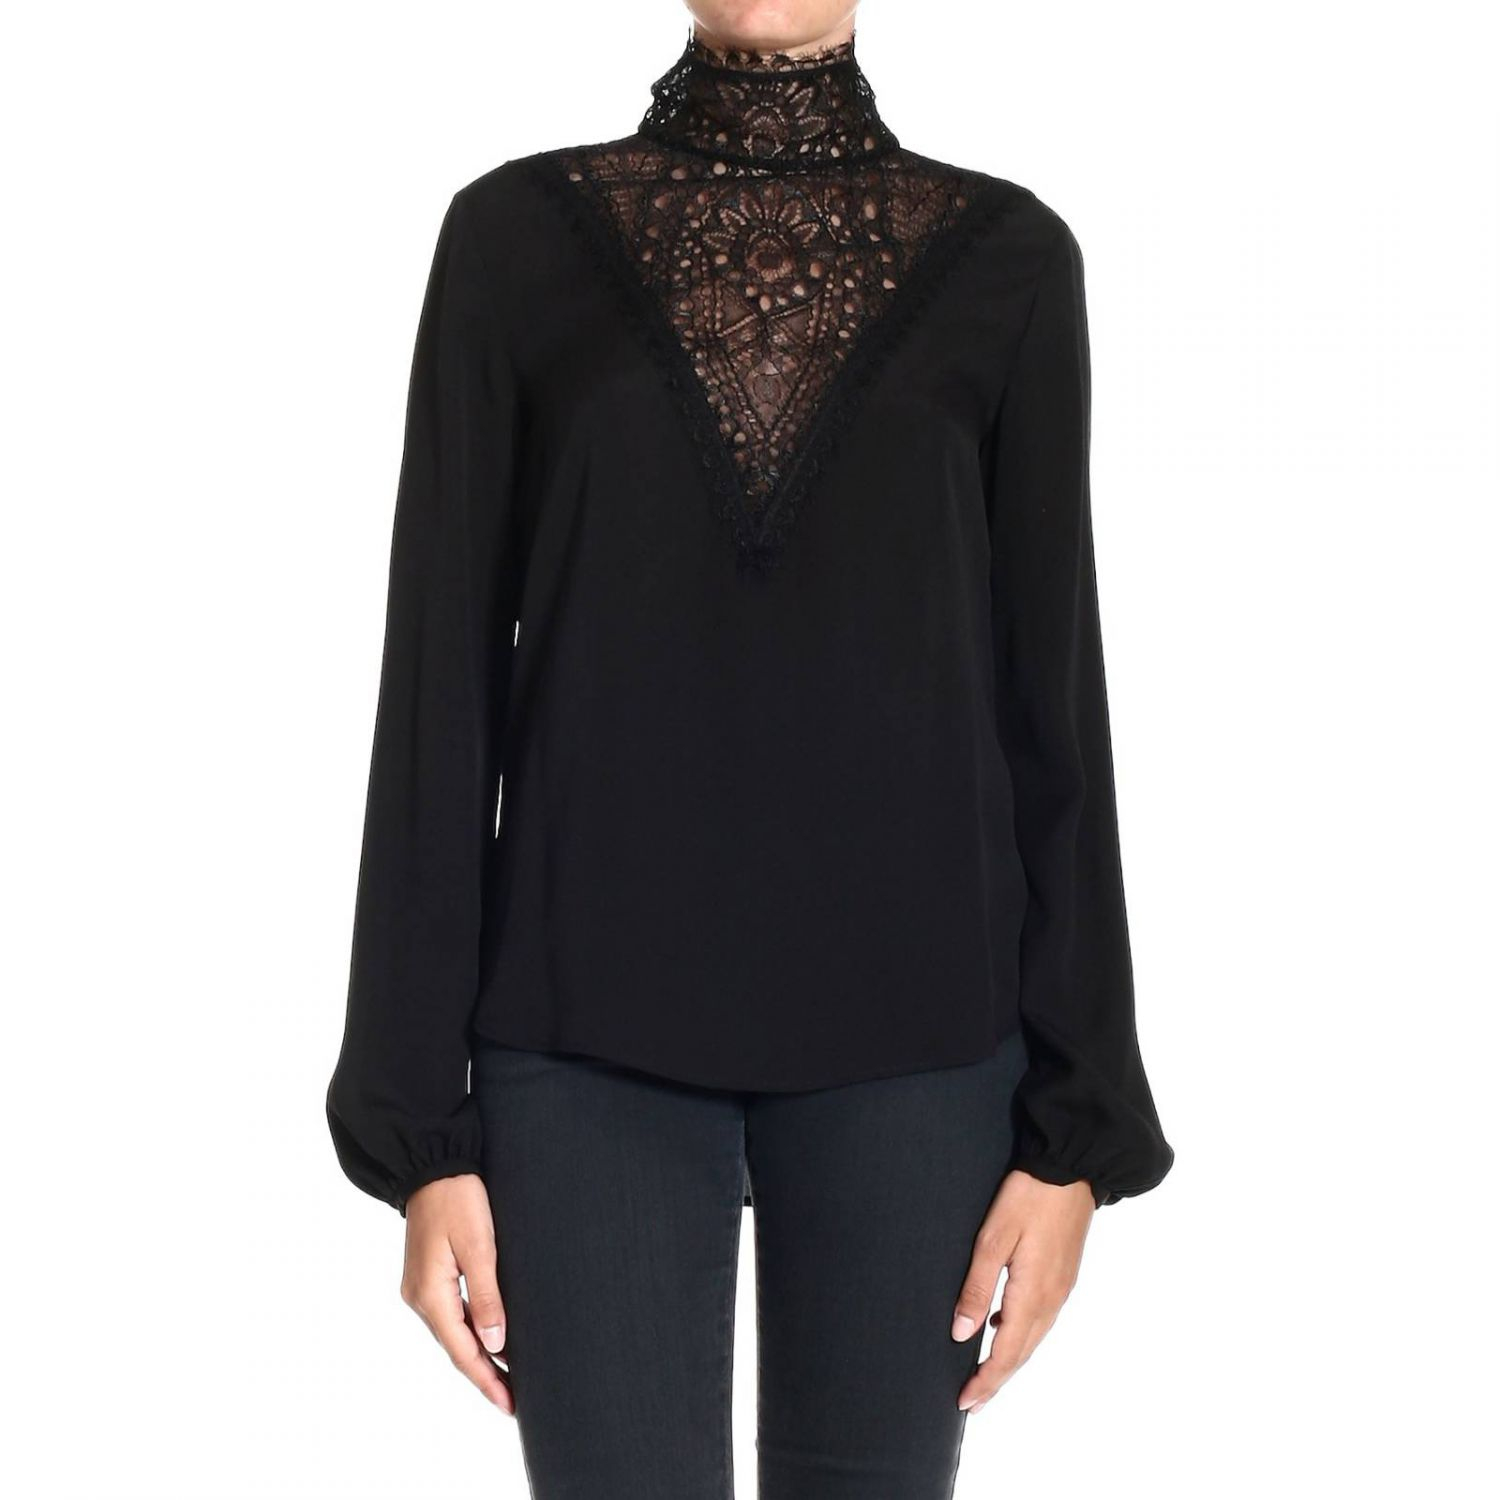 Lyst - Emilio Pucci Top Turtleneck Silk With V Neck Lace in Black